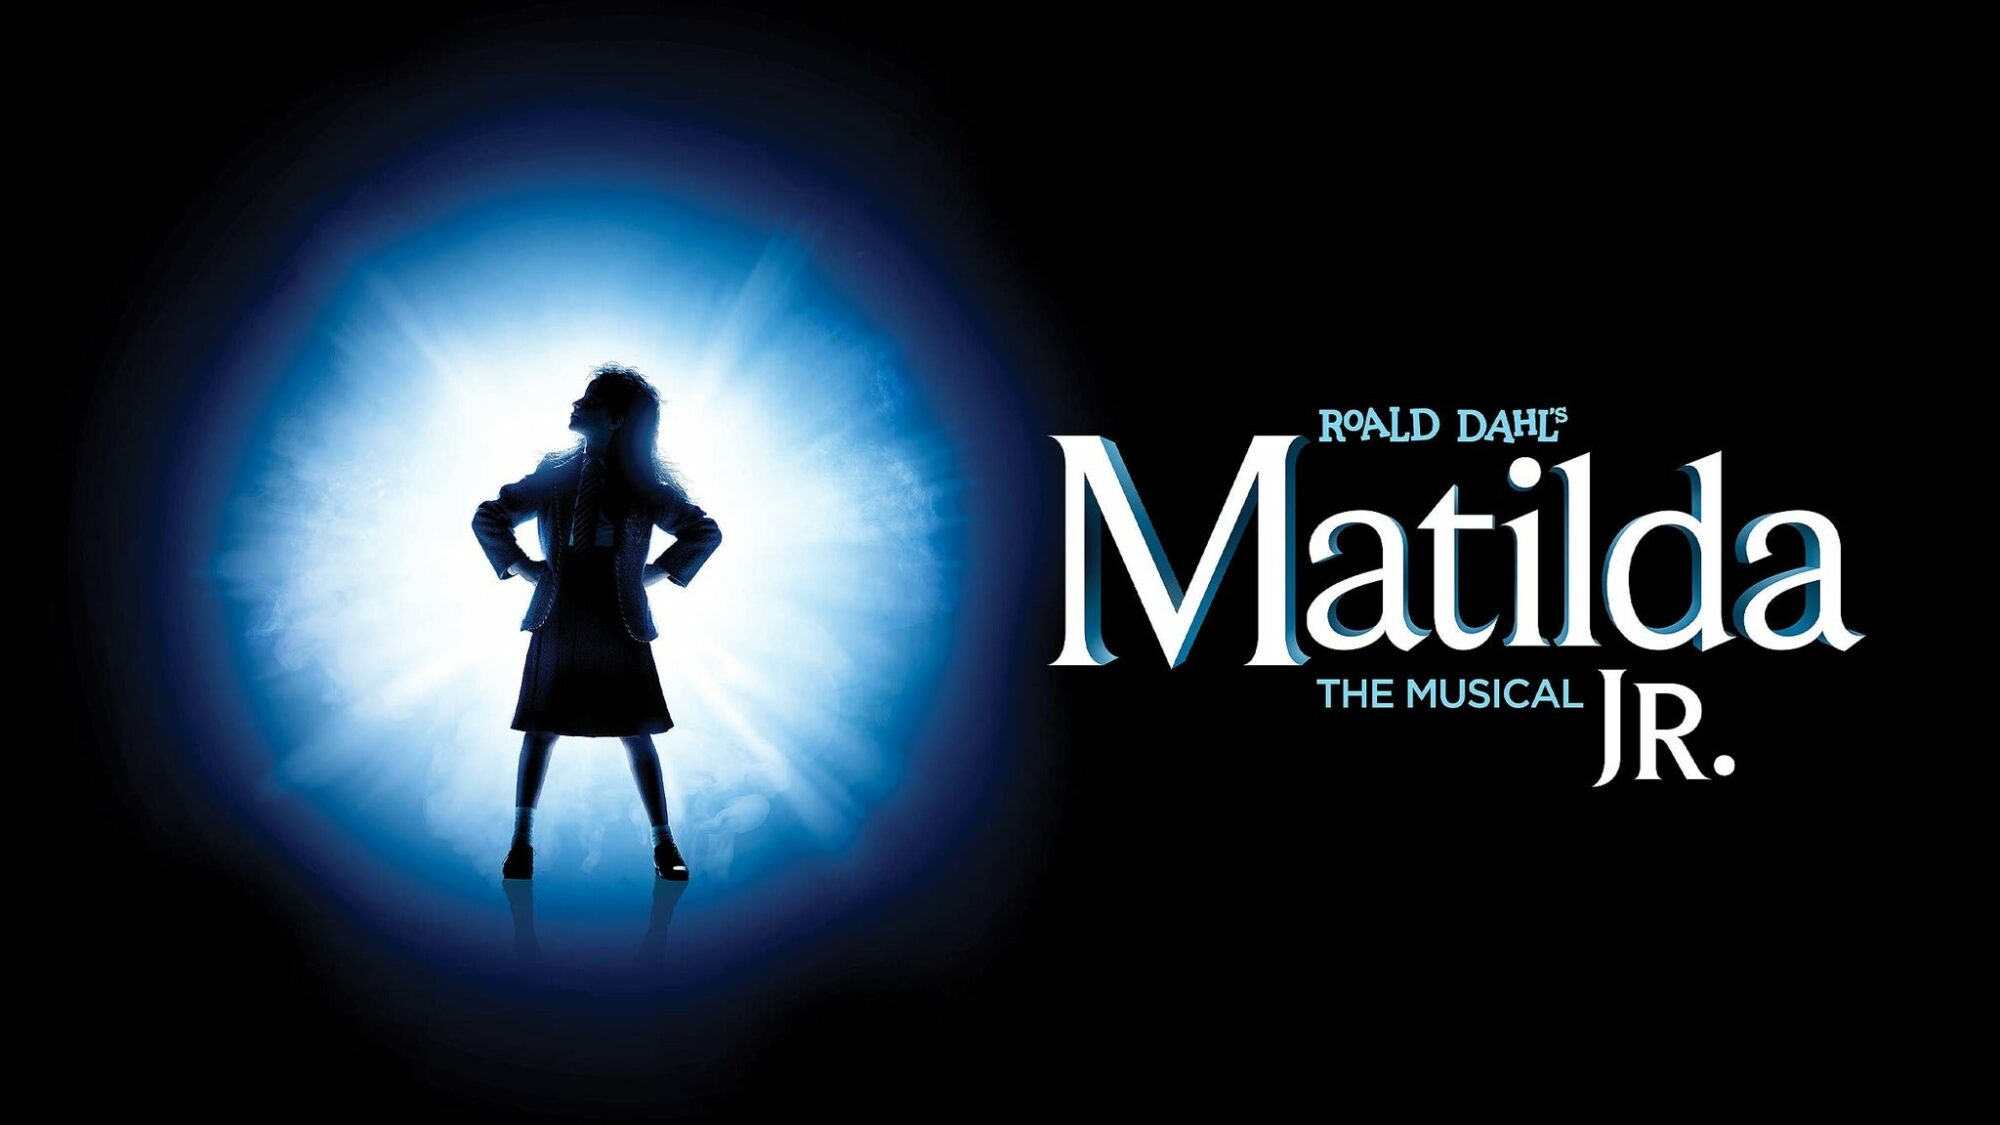 Image name Matilda Jr The Musical at Whitby Pavilion Theatre Whitby the 15 image from the post Events in Yorkshire.com.